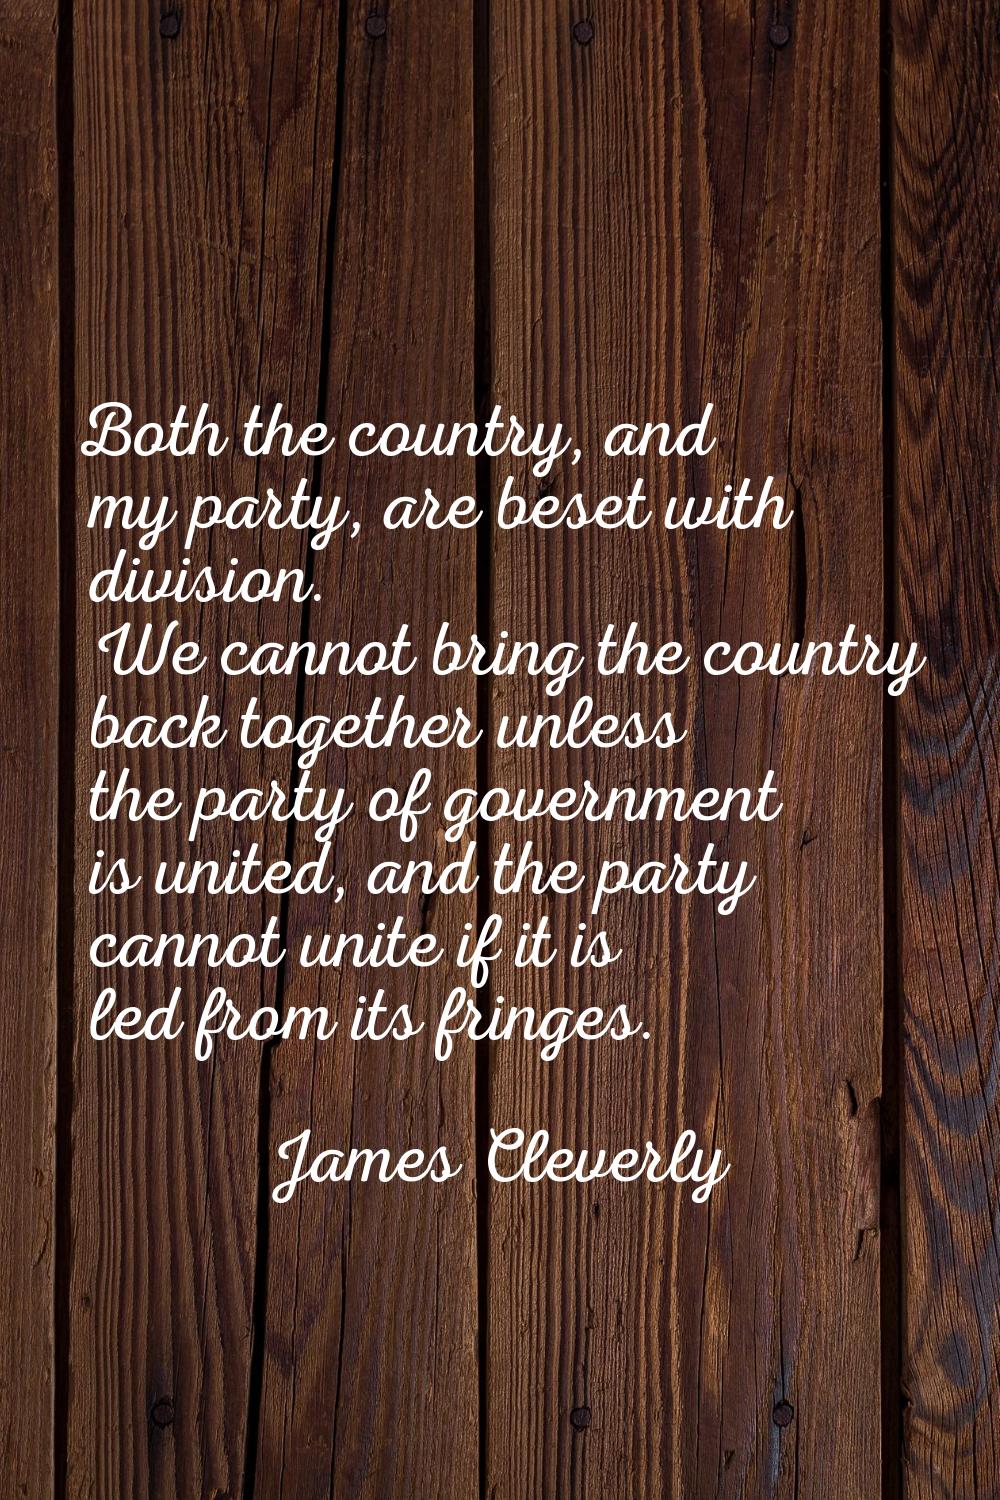 Both the country, and my party, are beset with division. We cannot bring the country back together 